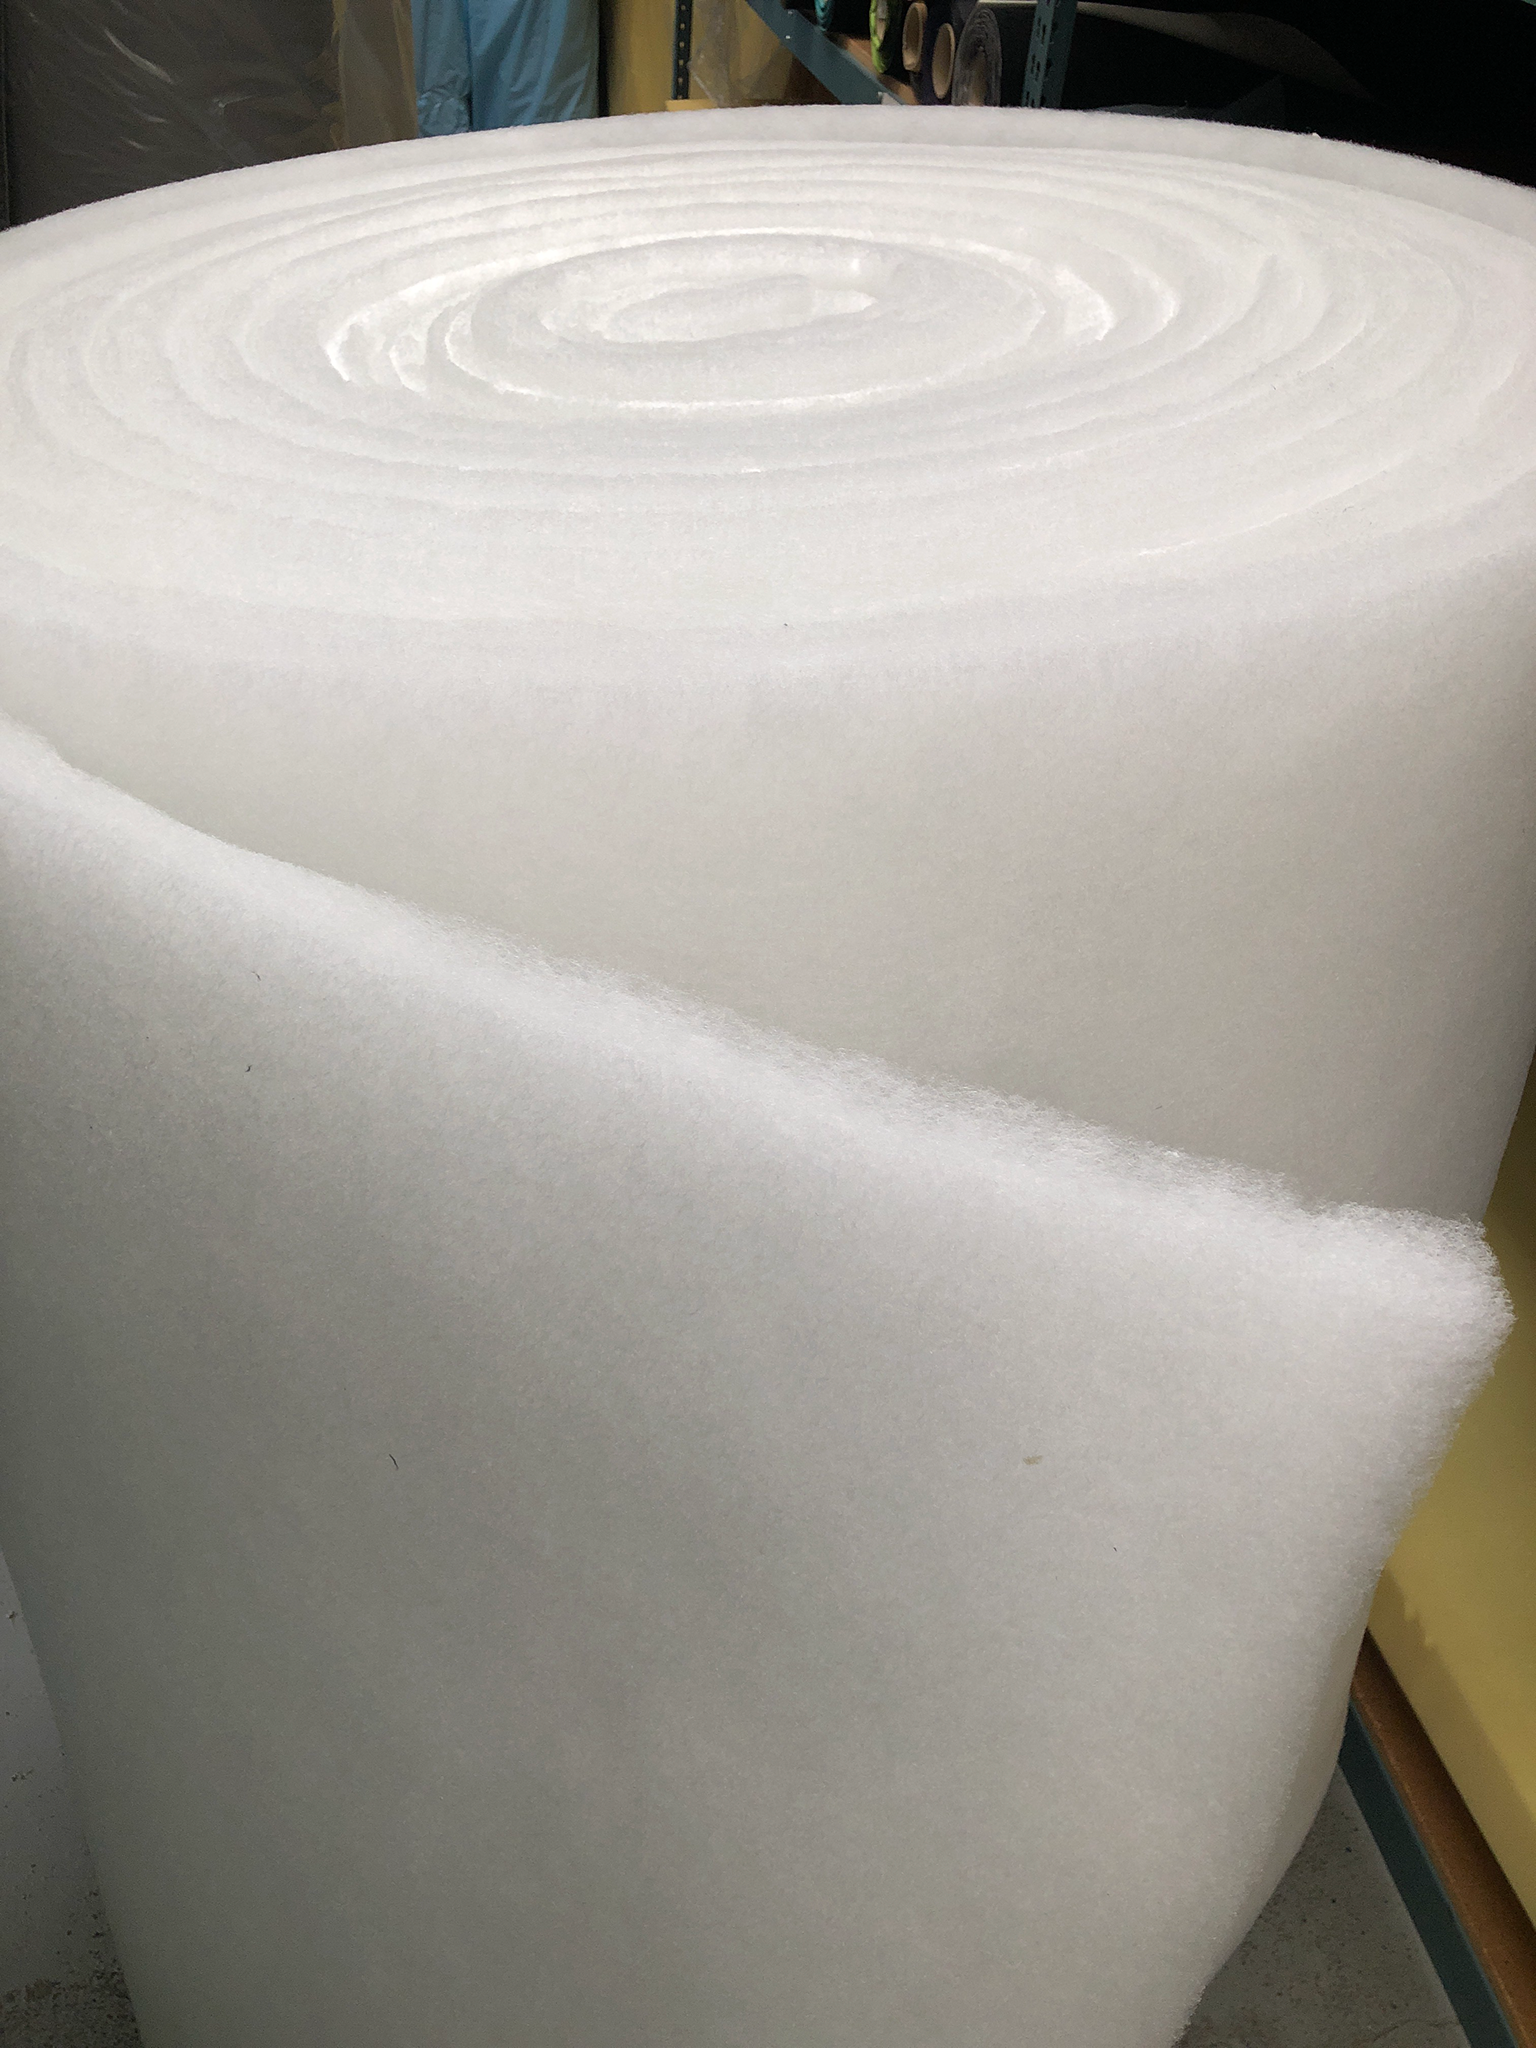 FoamFit Dacron Upholstery Batting Thin Loft 0.5 Ounces 5 Yards 36 inch Wide, Size: Length 5 Yards Width 36 Height 1/2, White